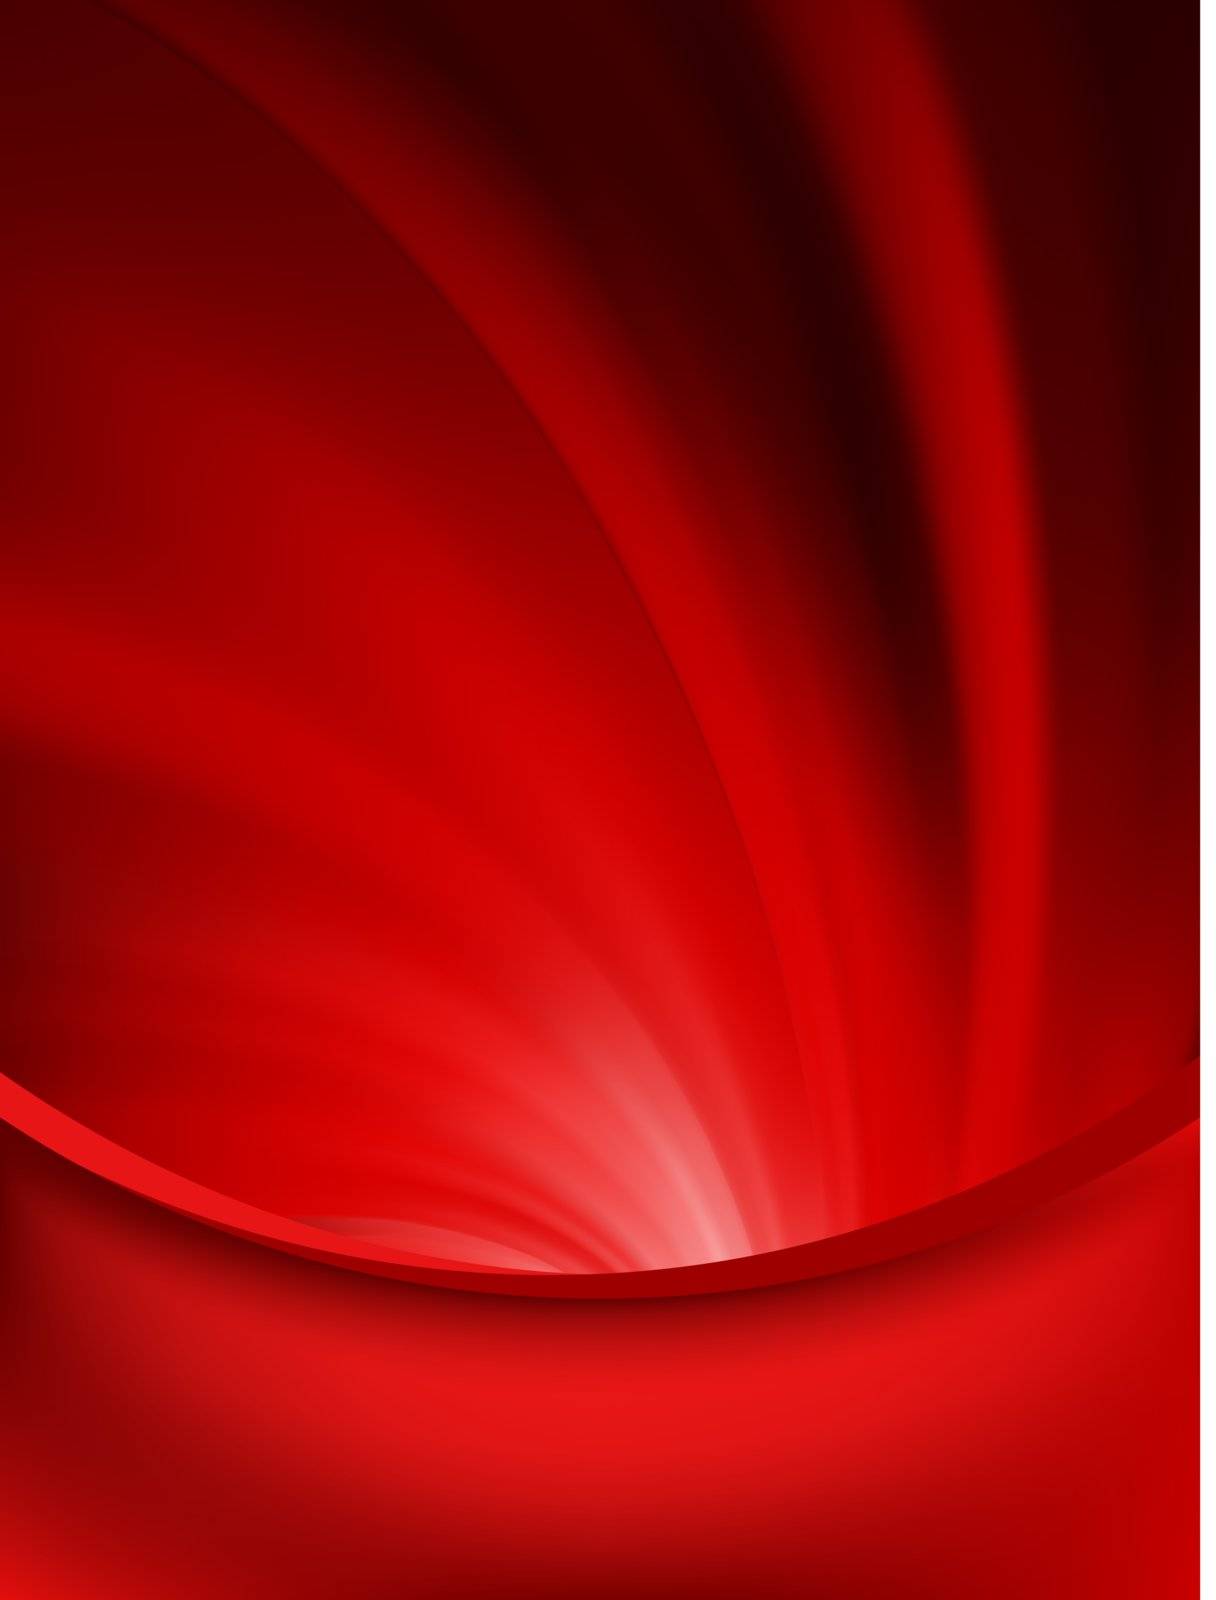 Red curtain fade to dark card. EPS 8 by Petrov_Vladimir